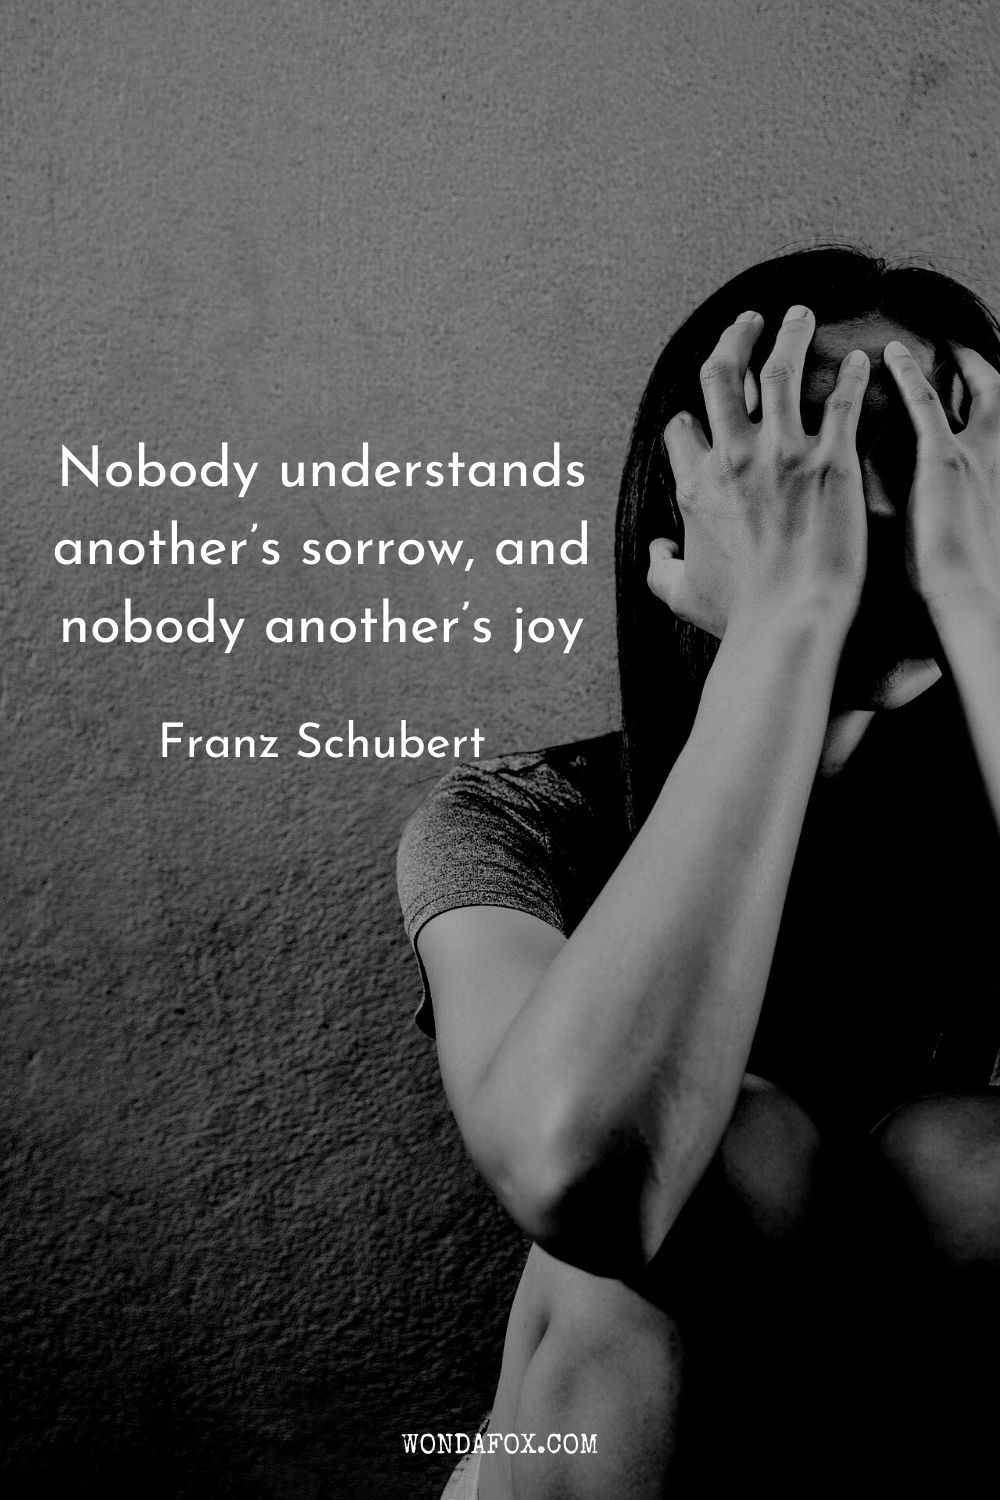 Nobody understands another’s sorrow, and nobody another’s joy